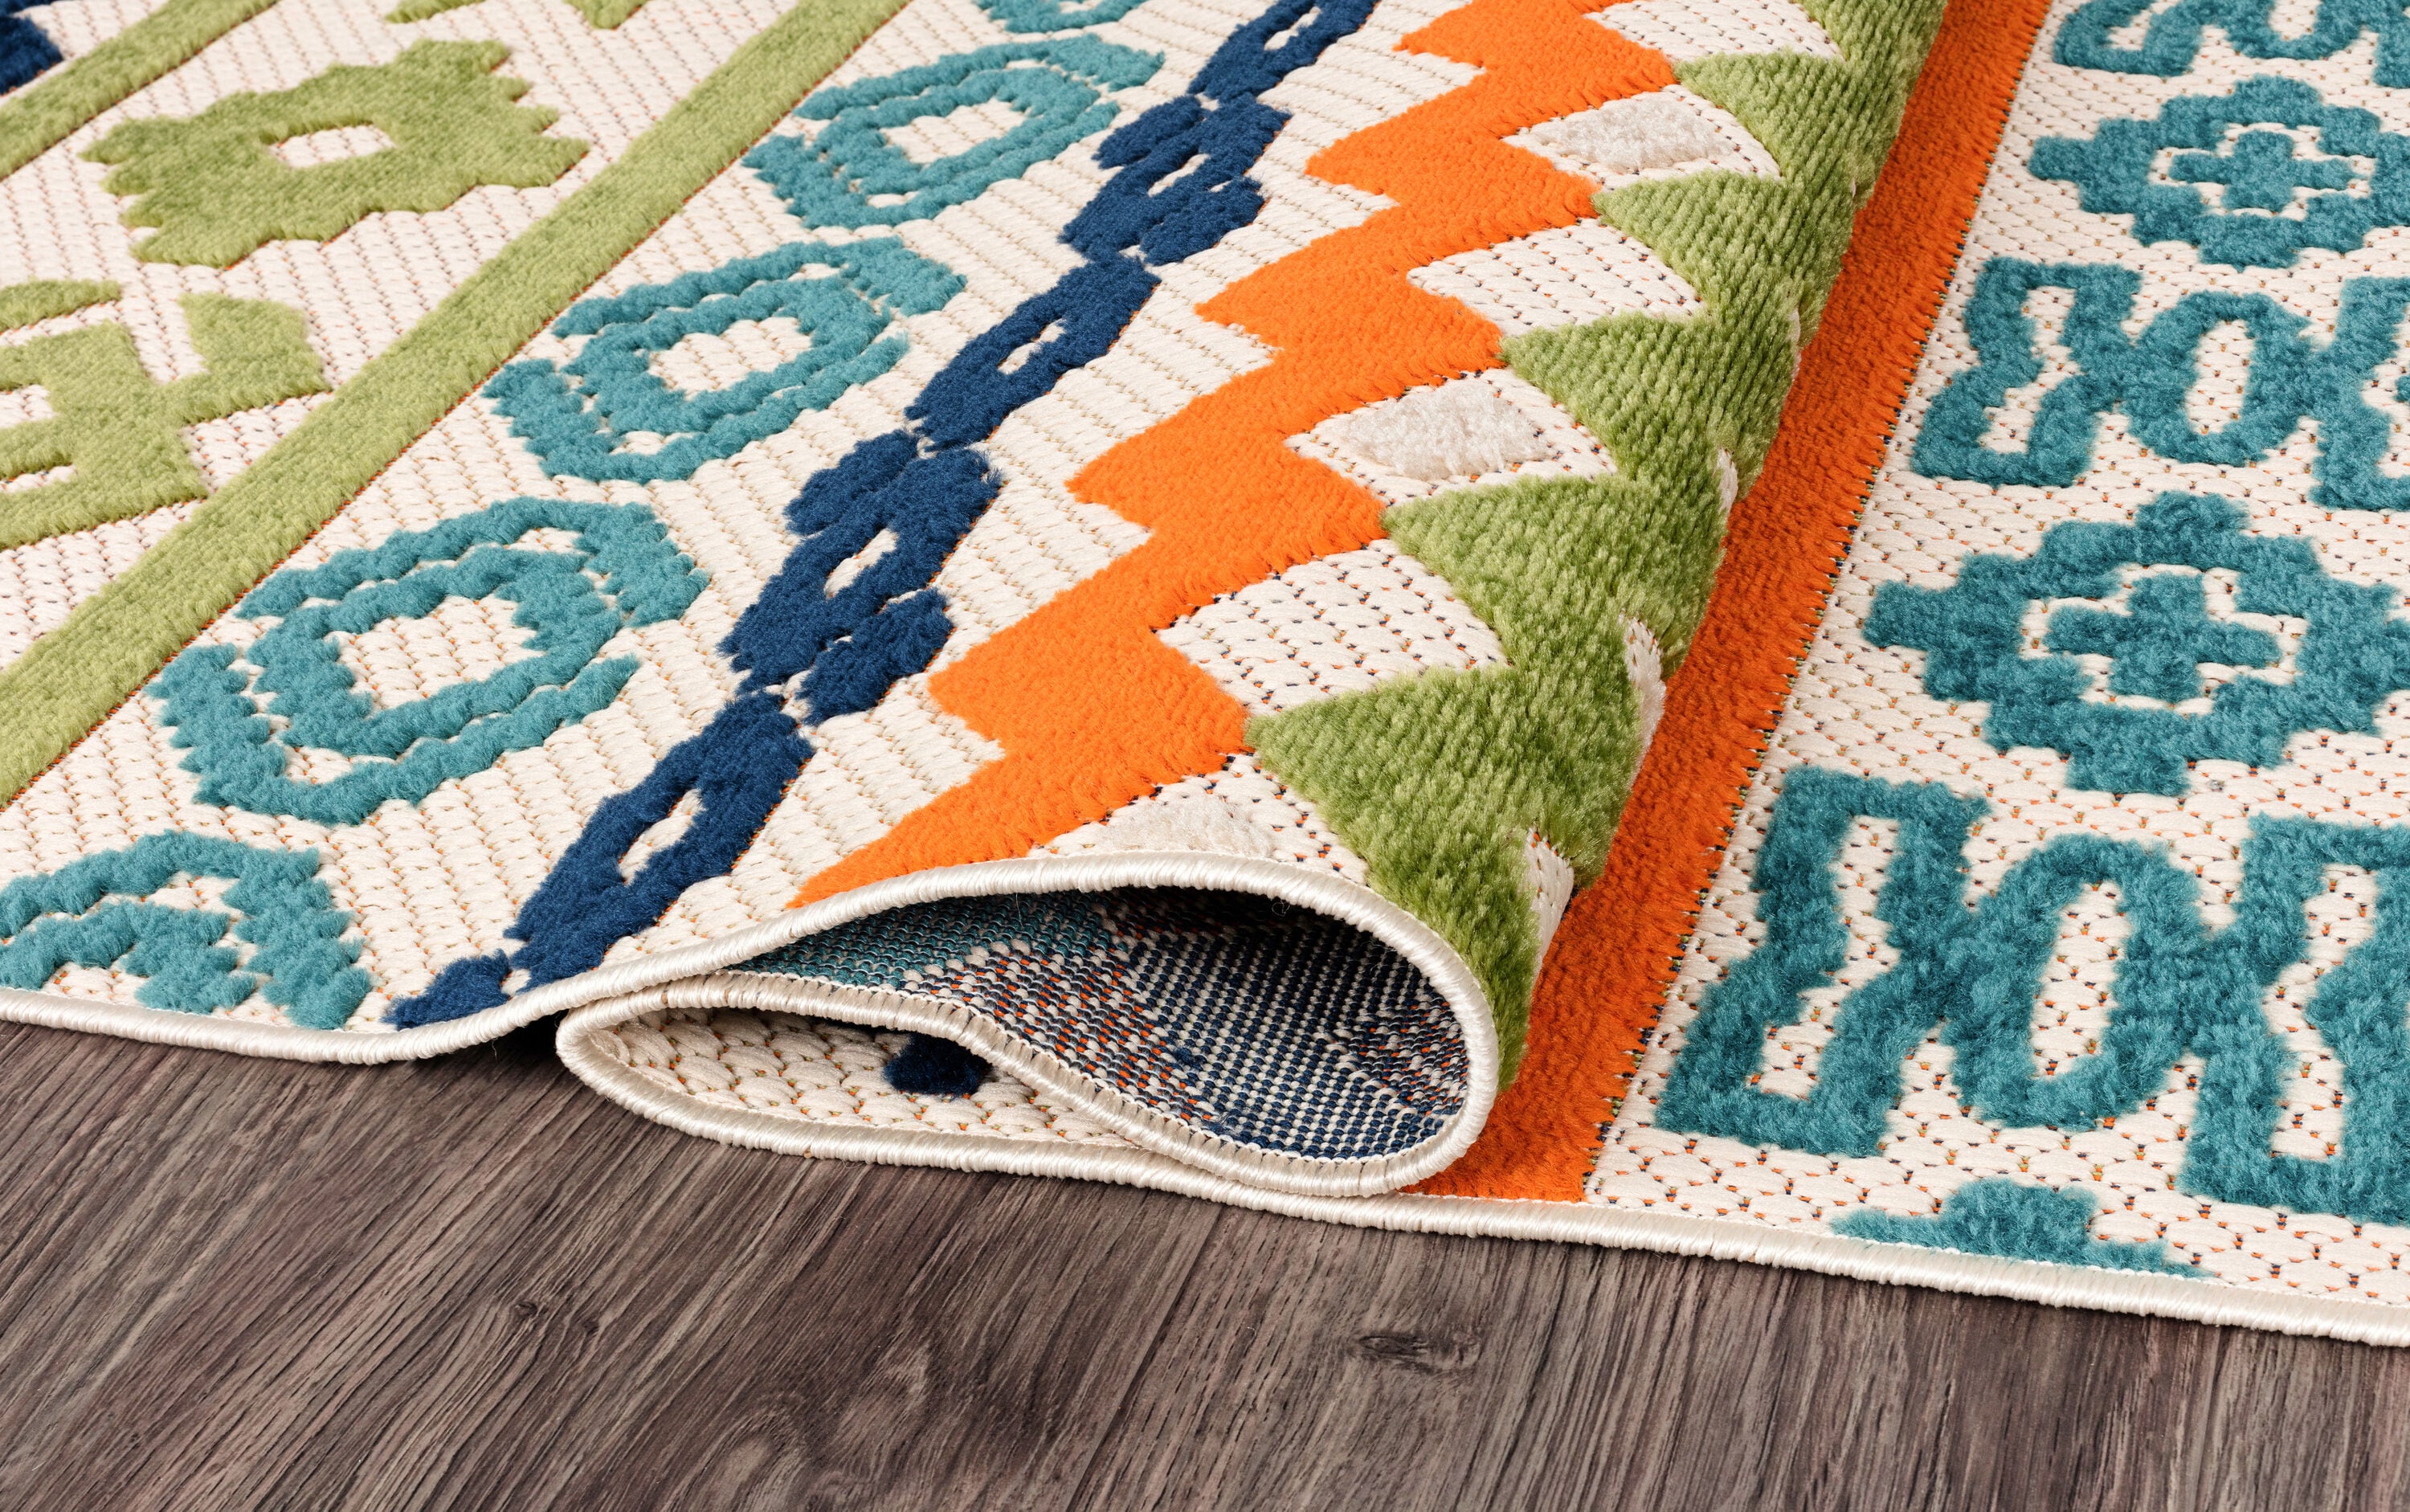 Indoor/Outdoor at in 2 Area Geometric Rugs World Rug X department 7 Gallery Rug the